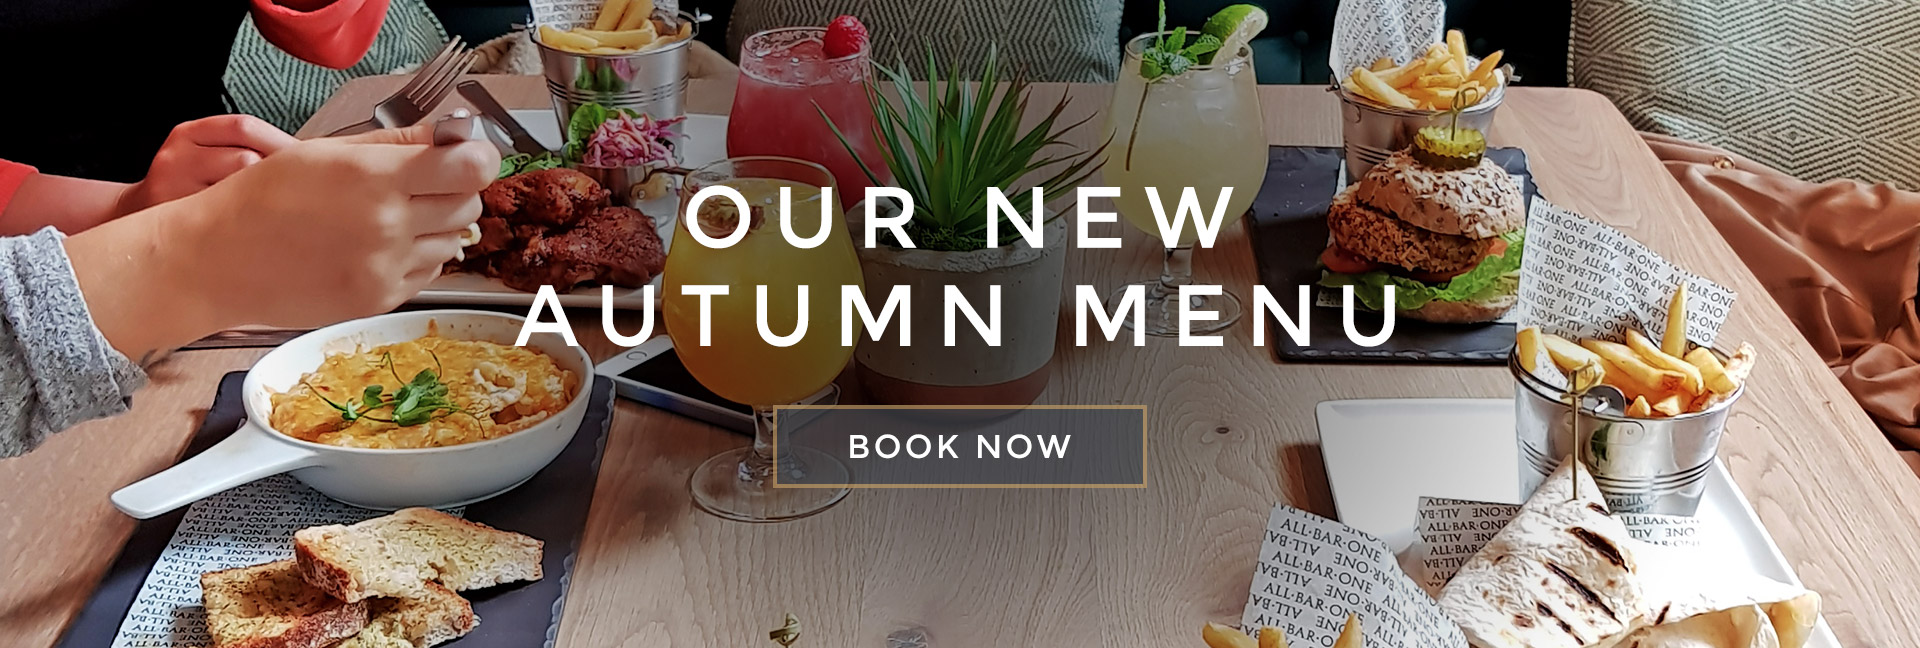 Our new Autumn menu at All Bar One Moorgate - Book now